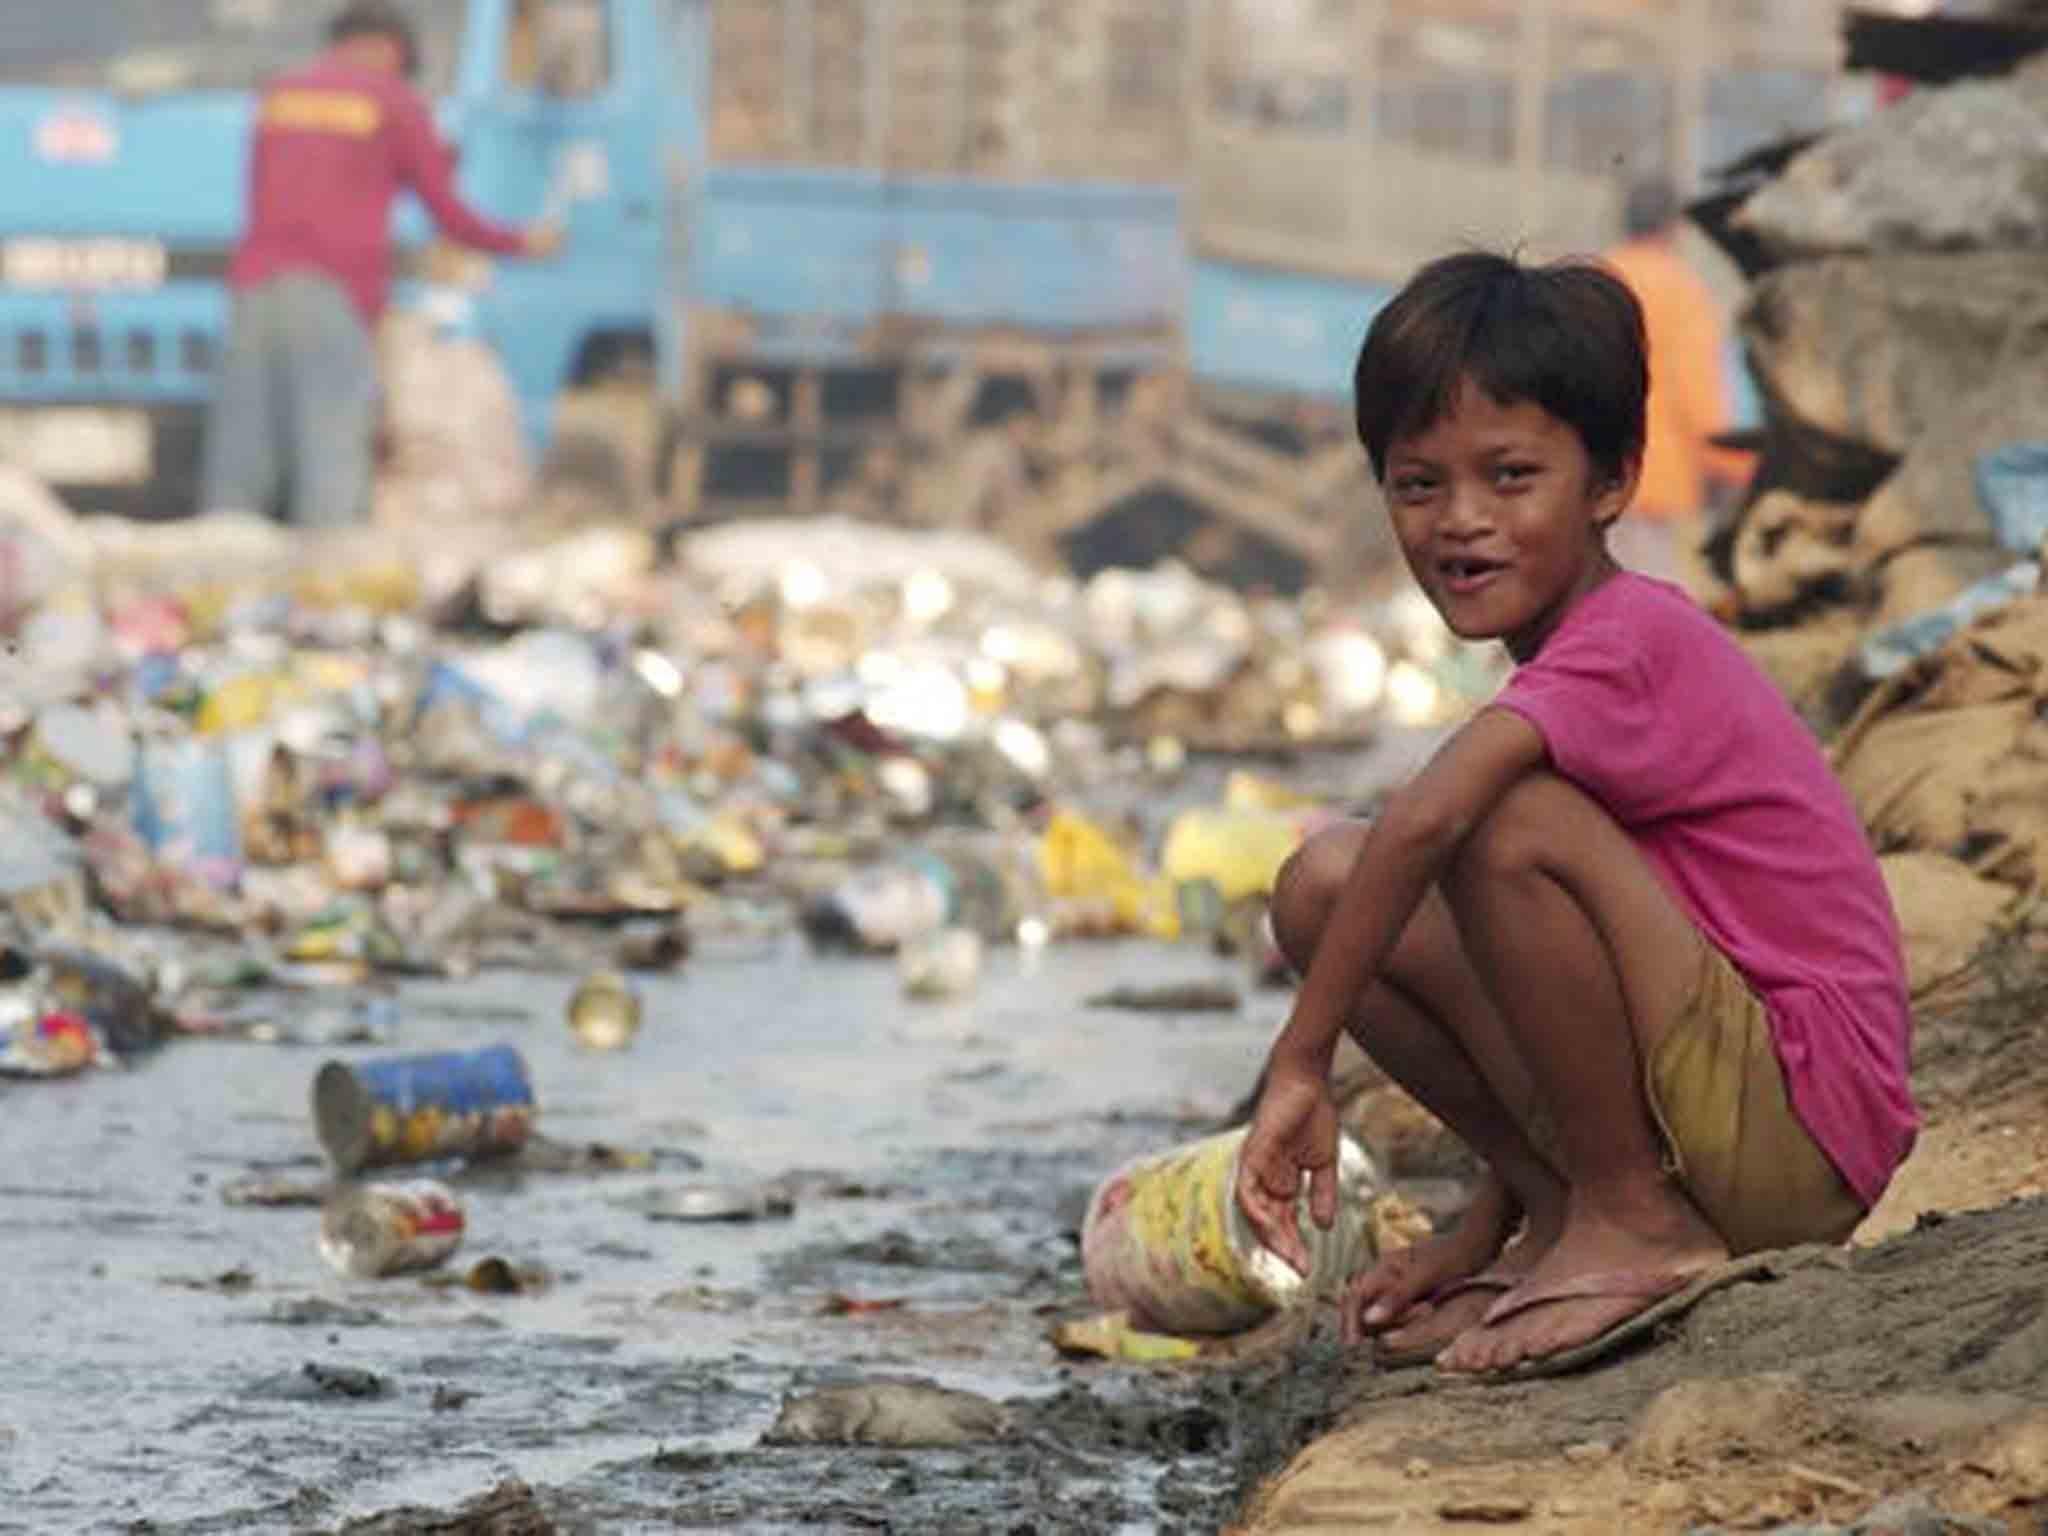 &#13;
A young student waits for classes to begin at a free school in one of the poorest neighbourhoods which surrounds Metro Manila's largest landfill in Payatas, Philippines &#13;